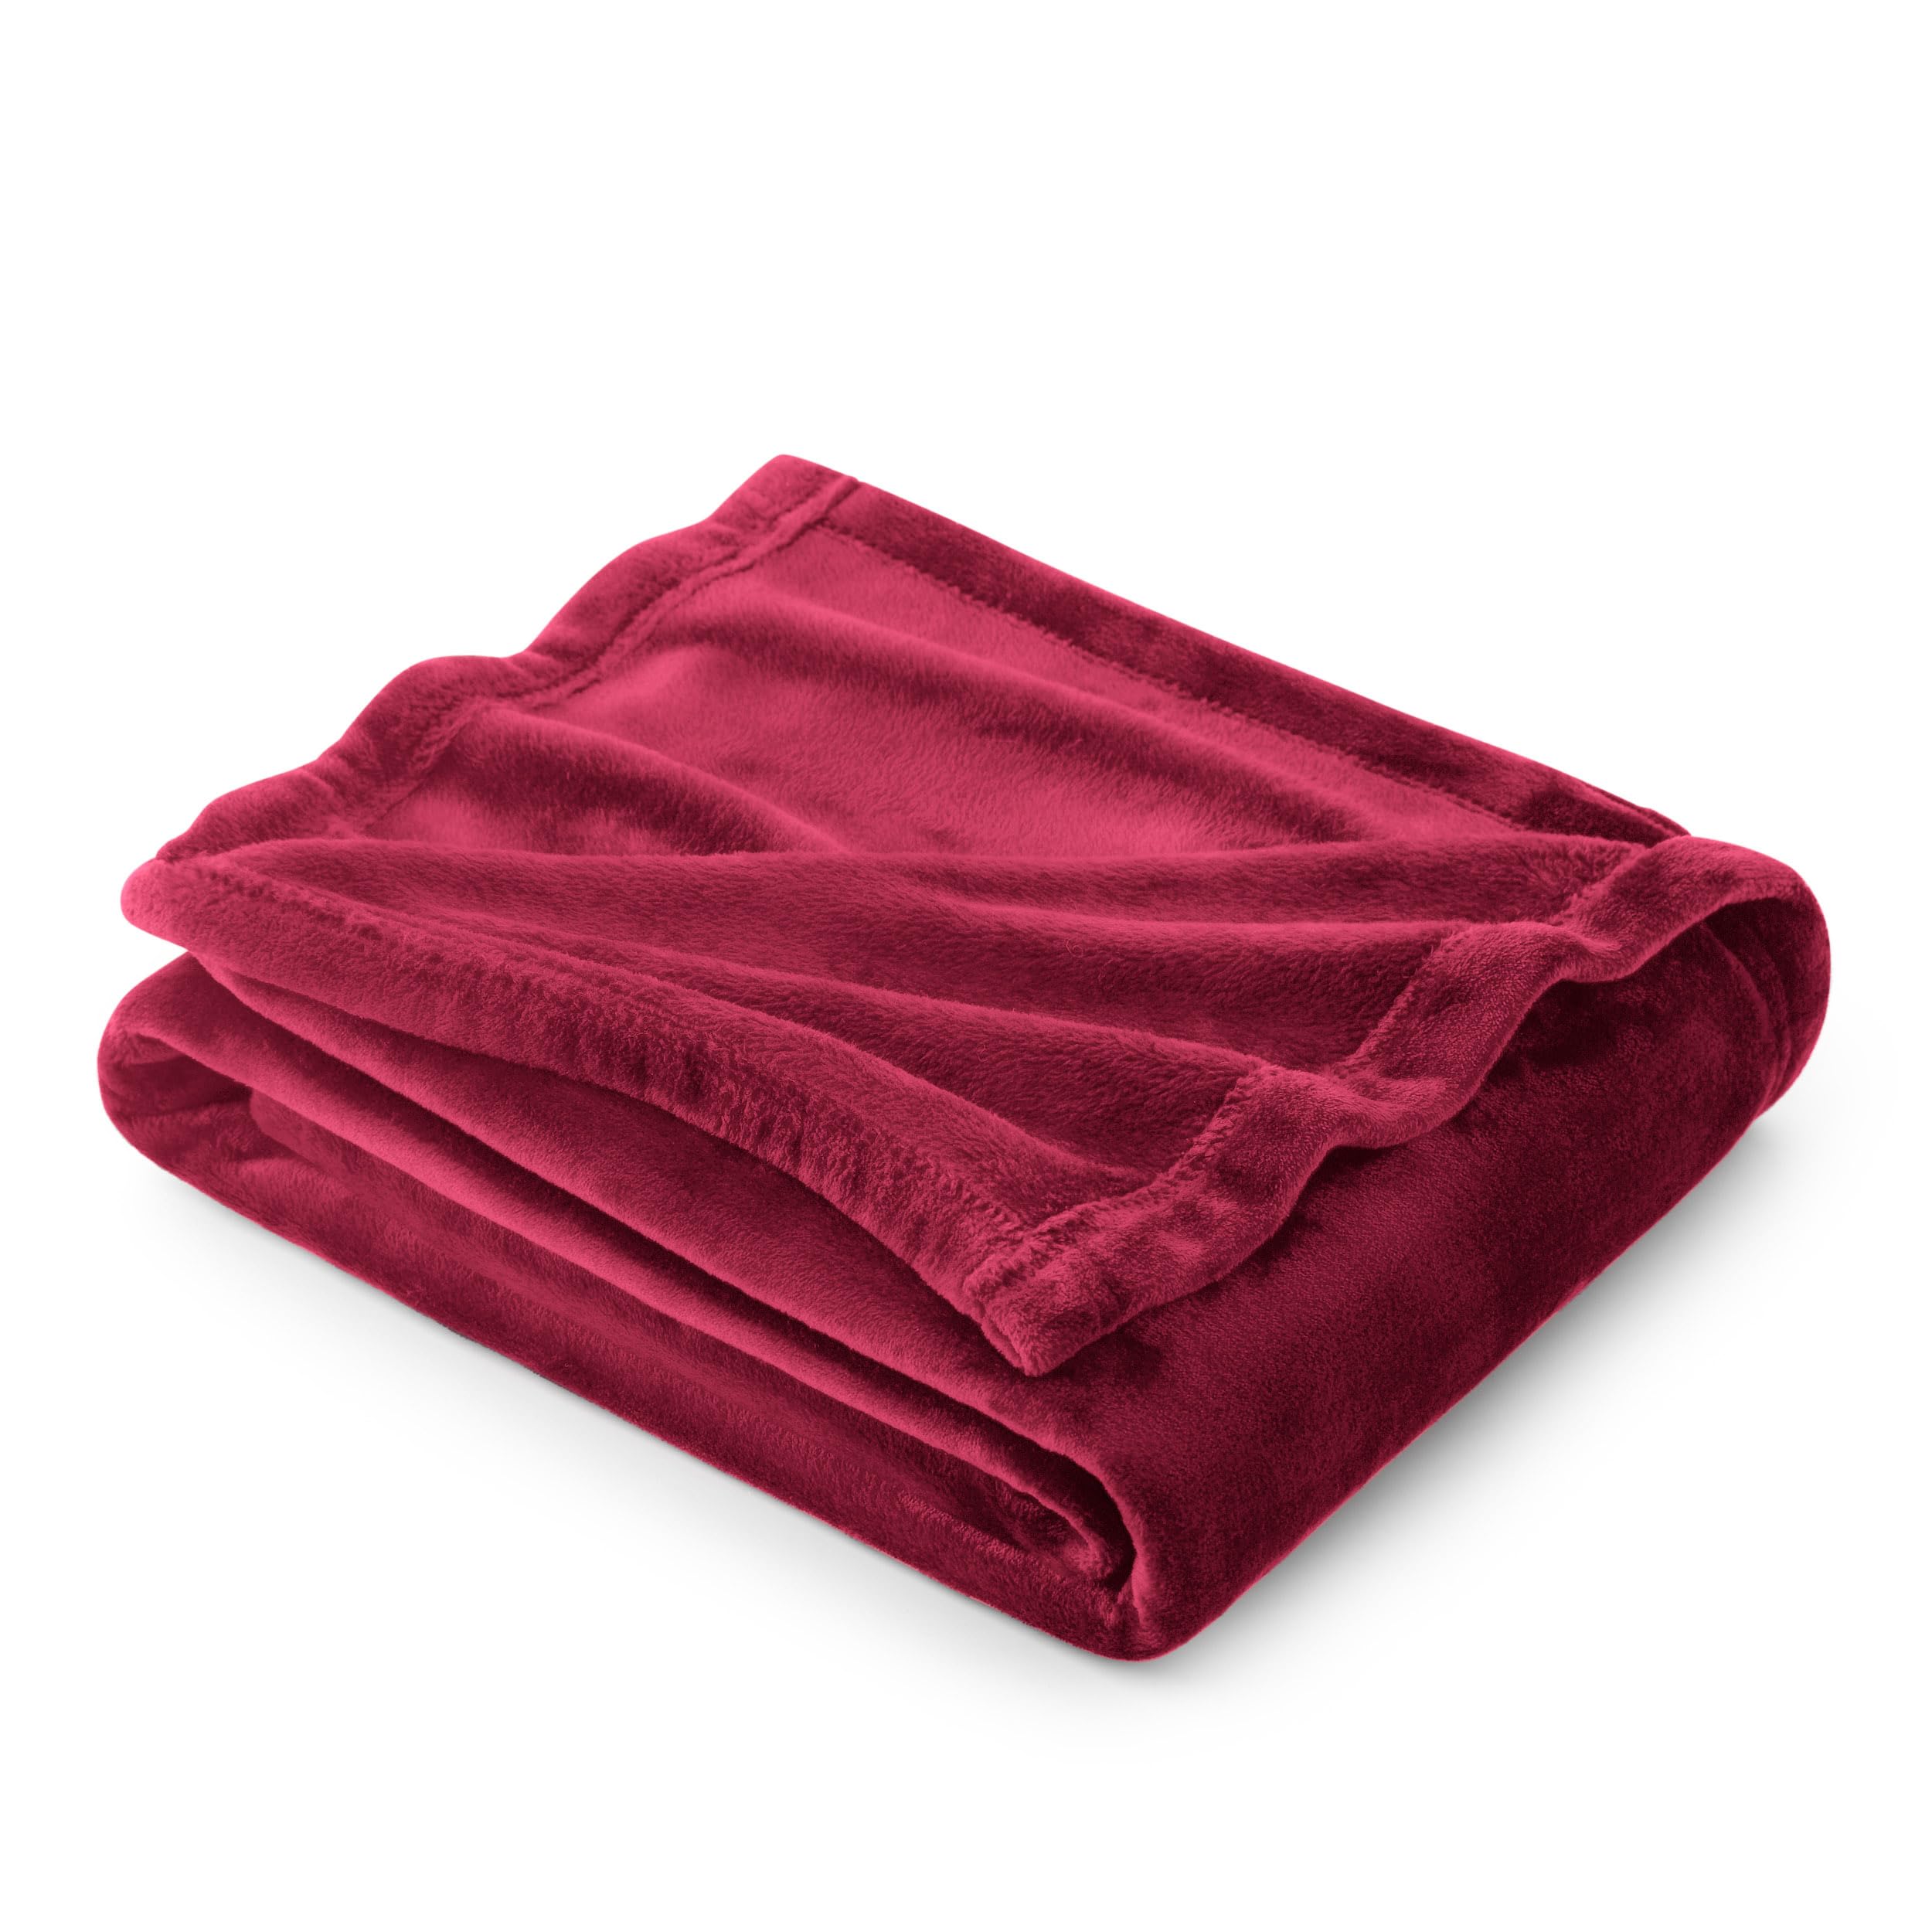 Book Cover Bedsure Fleece Blanket Twin Blanket Burgundy - 300GSM Soft Lightweight Plush Cozy Twin Blankets for Bed, Sofa, Couch, Travel, Camping, 60x80 inches Twin (60